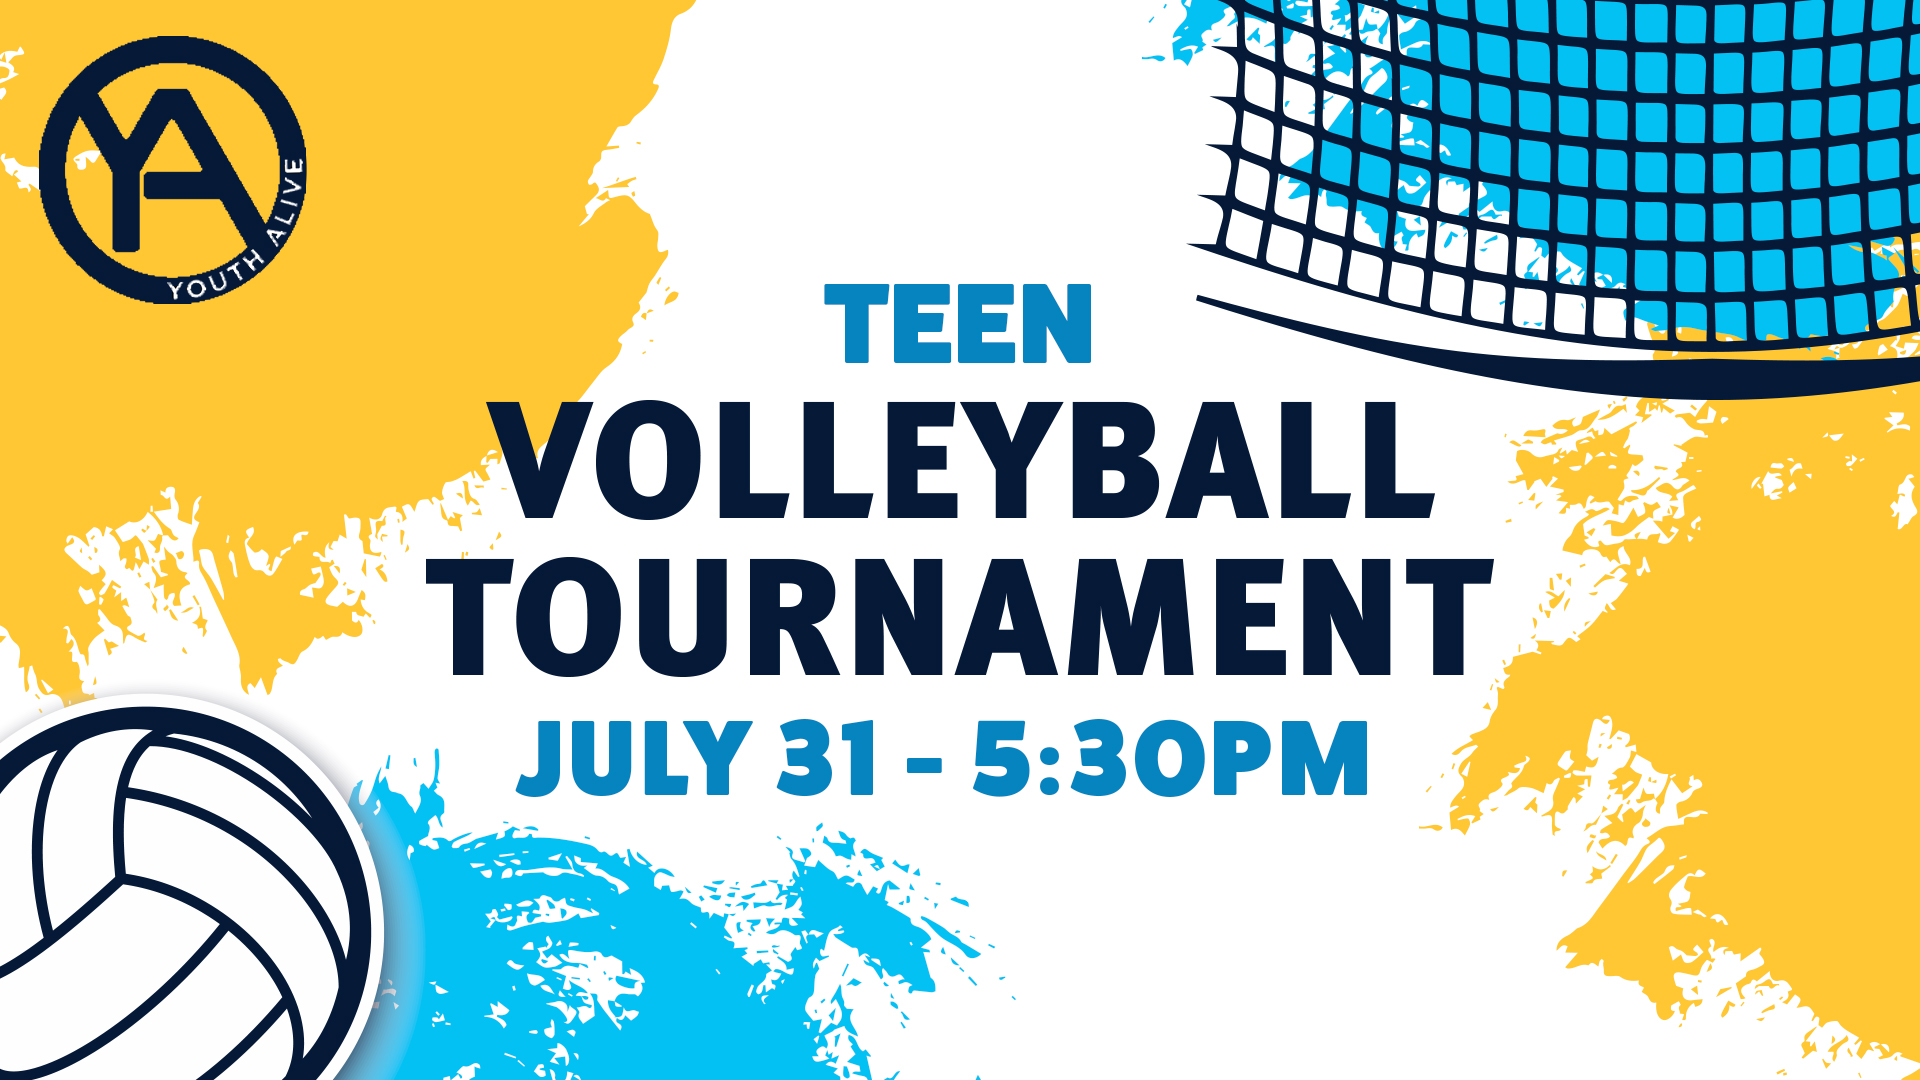 Teen Volleyball Tournament July 31 - 5:30 pm